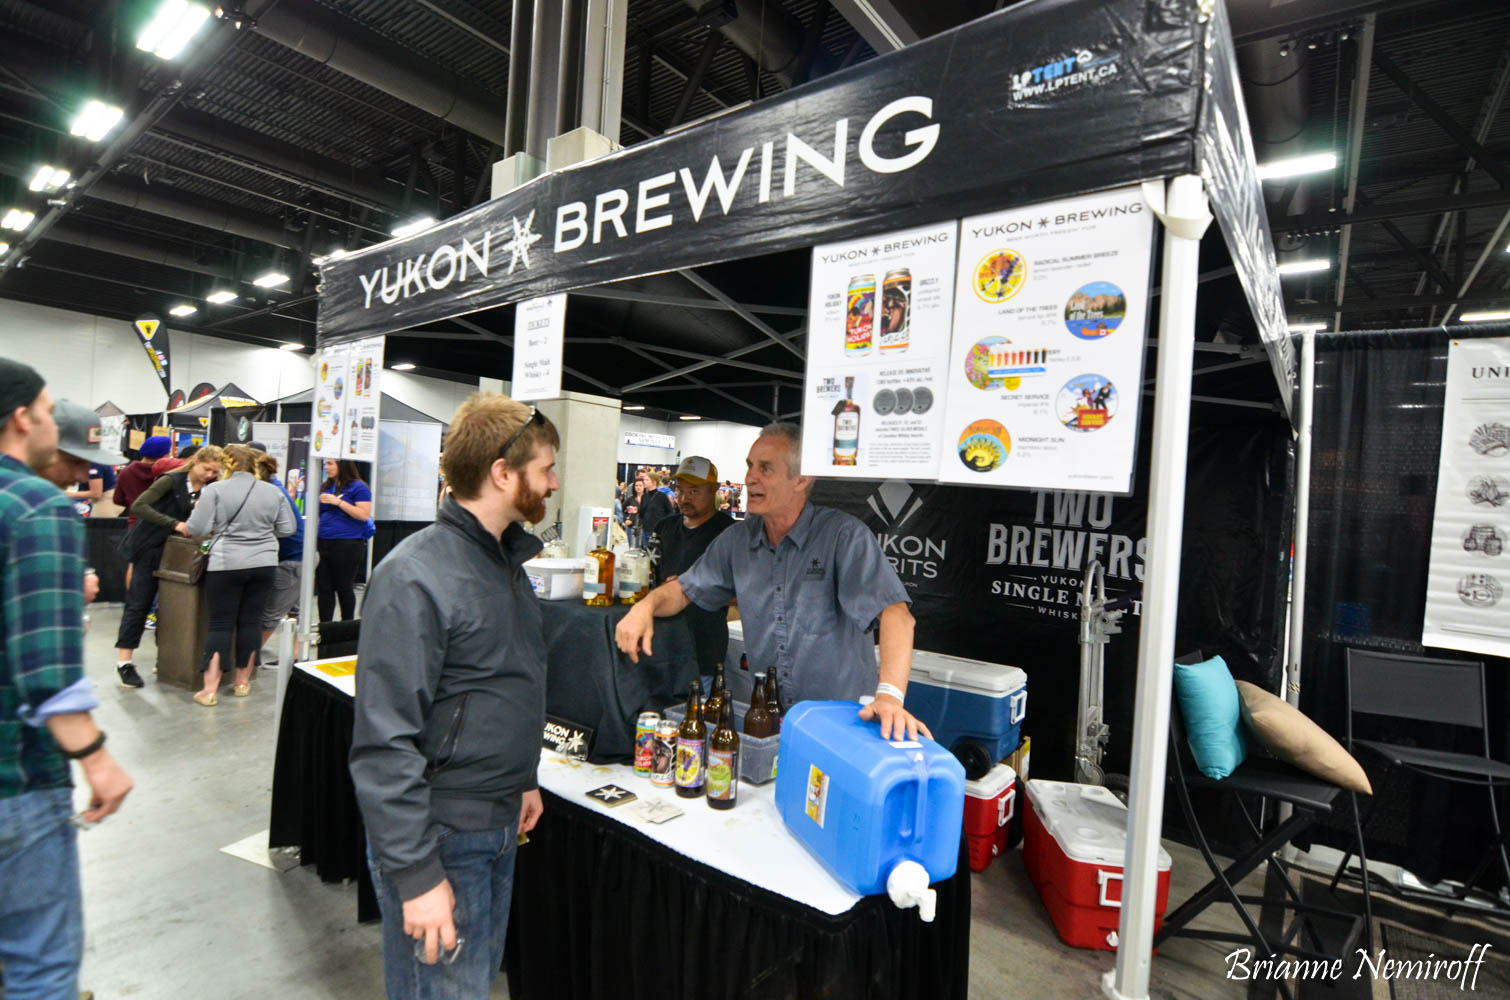 benjamin hagerty of it's bree and ben talking about craft beer at a festival in edmonton, alberta